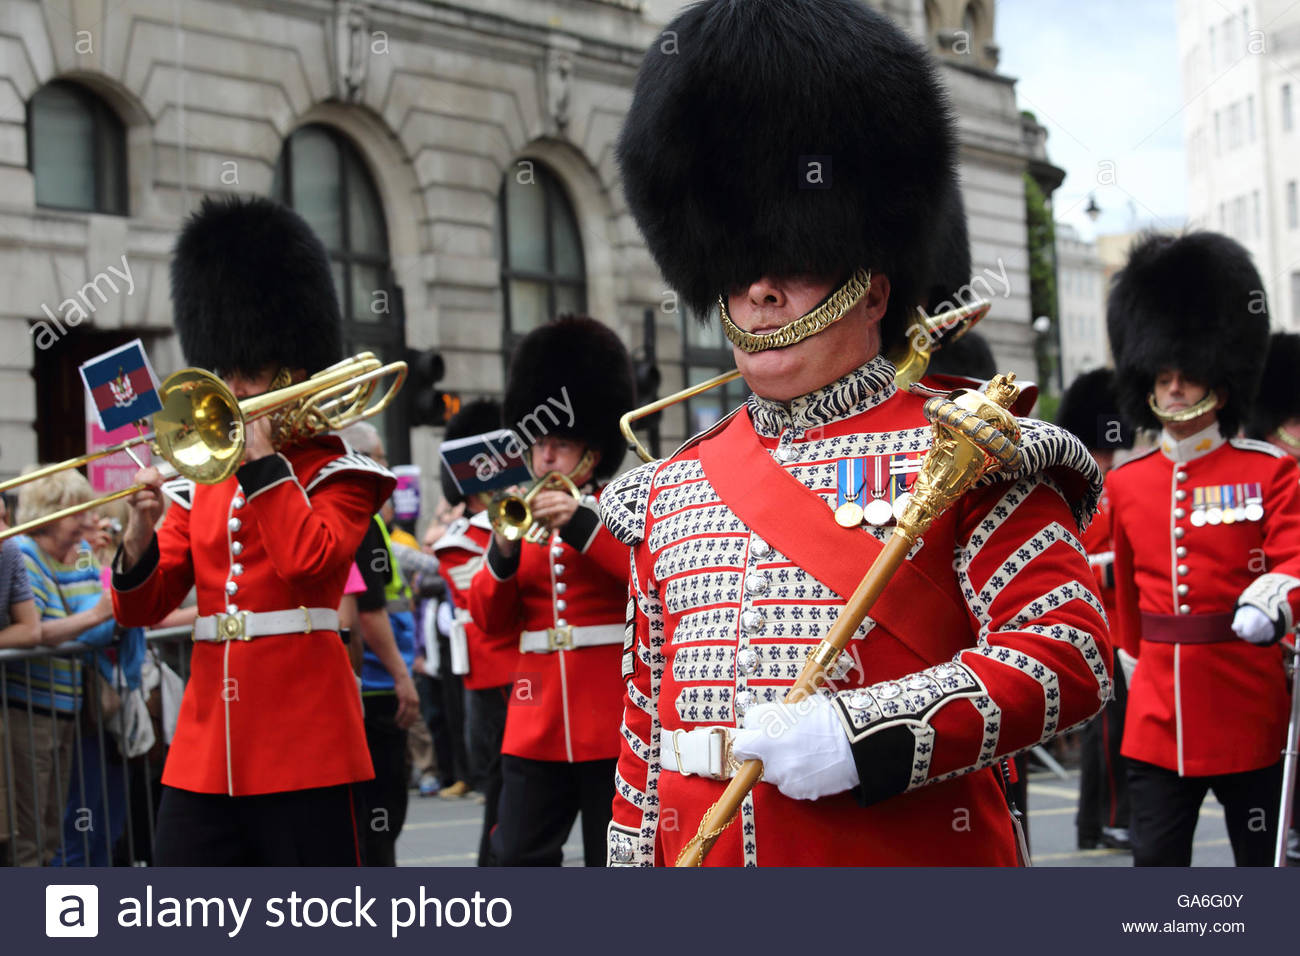 Marching guardsmen in red uniforms take part in London pride Stock Photo